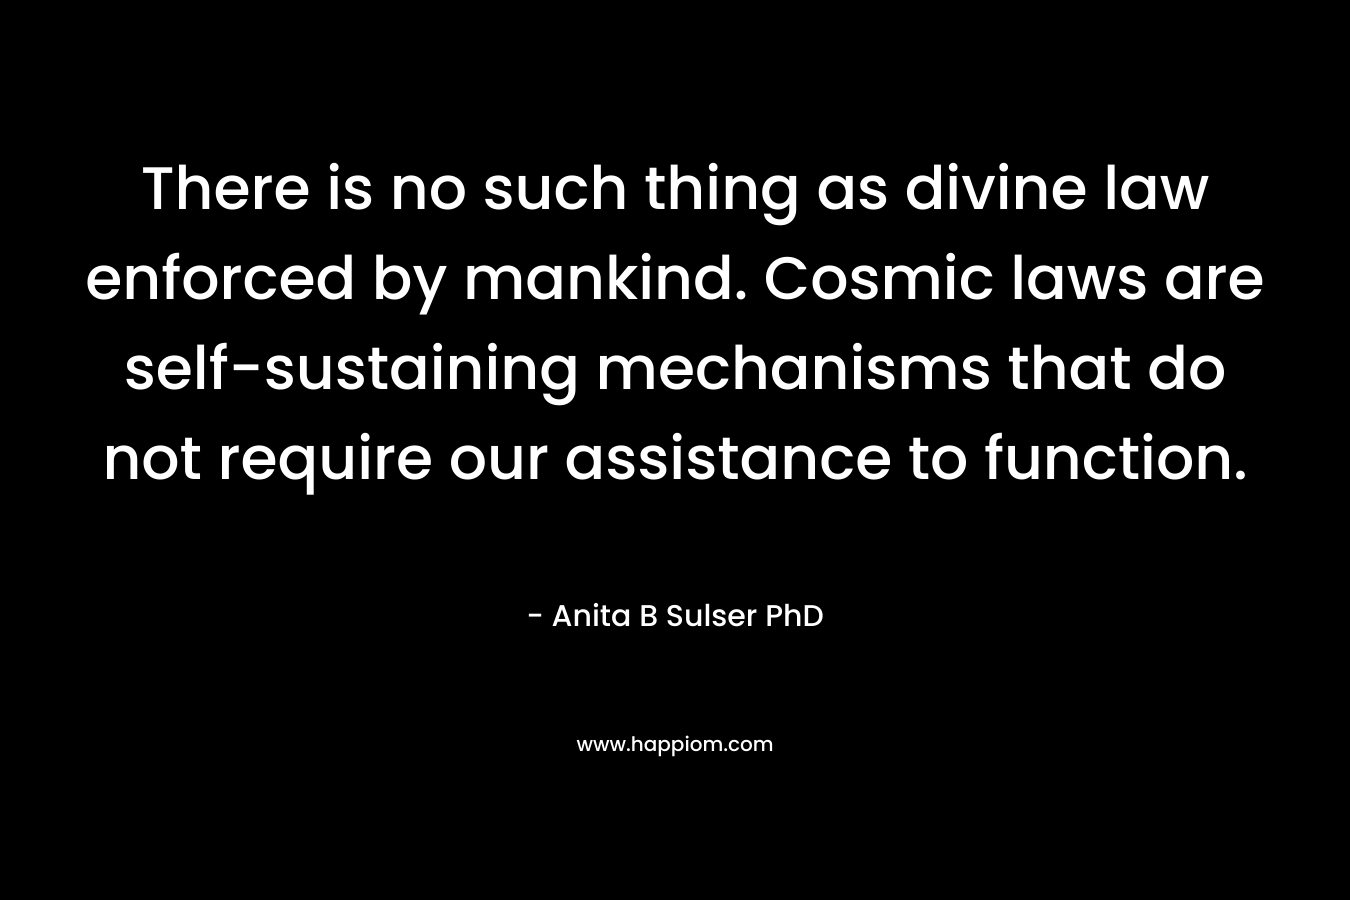 There is no such thing as divine law enforced by mankind. Cosmic laws are self-sustaining mechanisms that do not require our assistance to function. – Anita B Sulser PhD